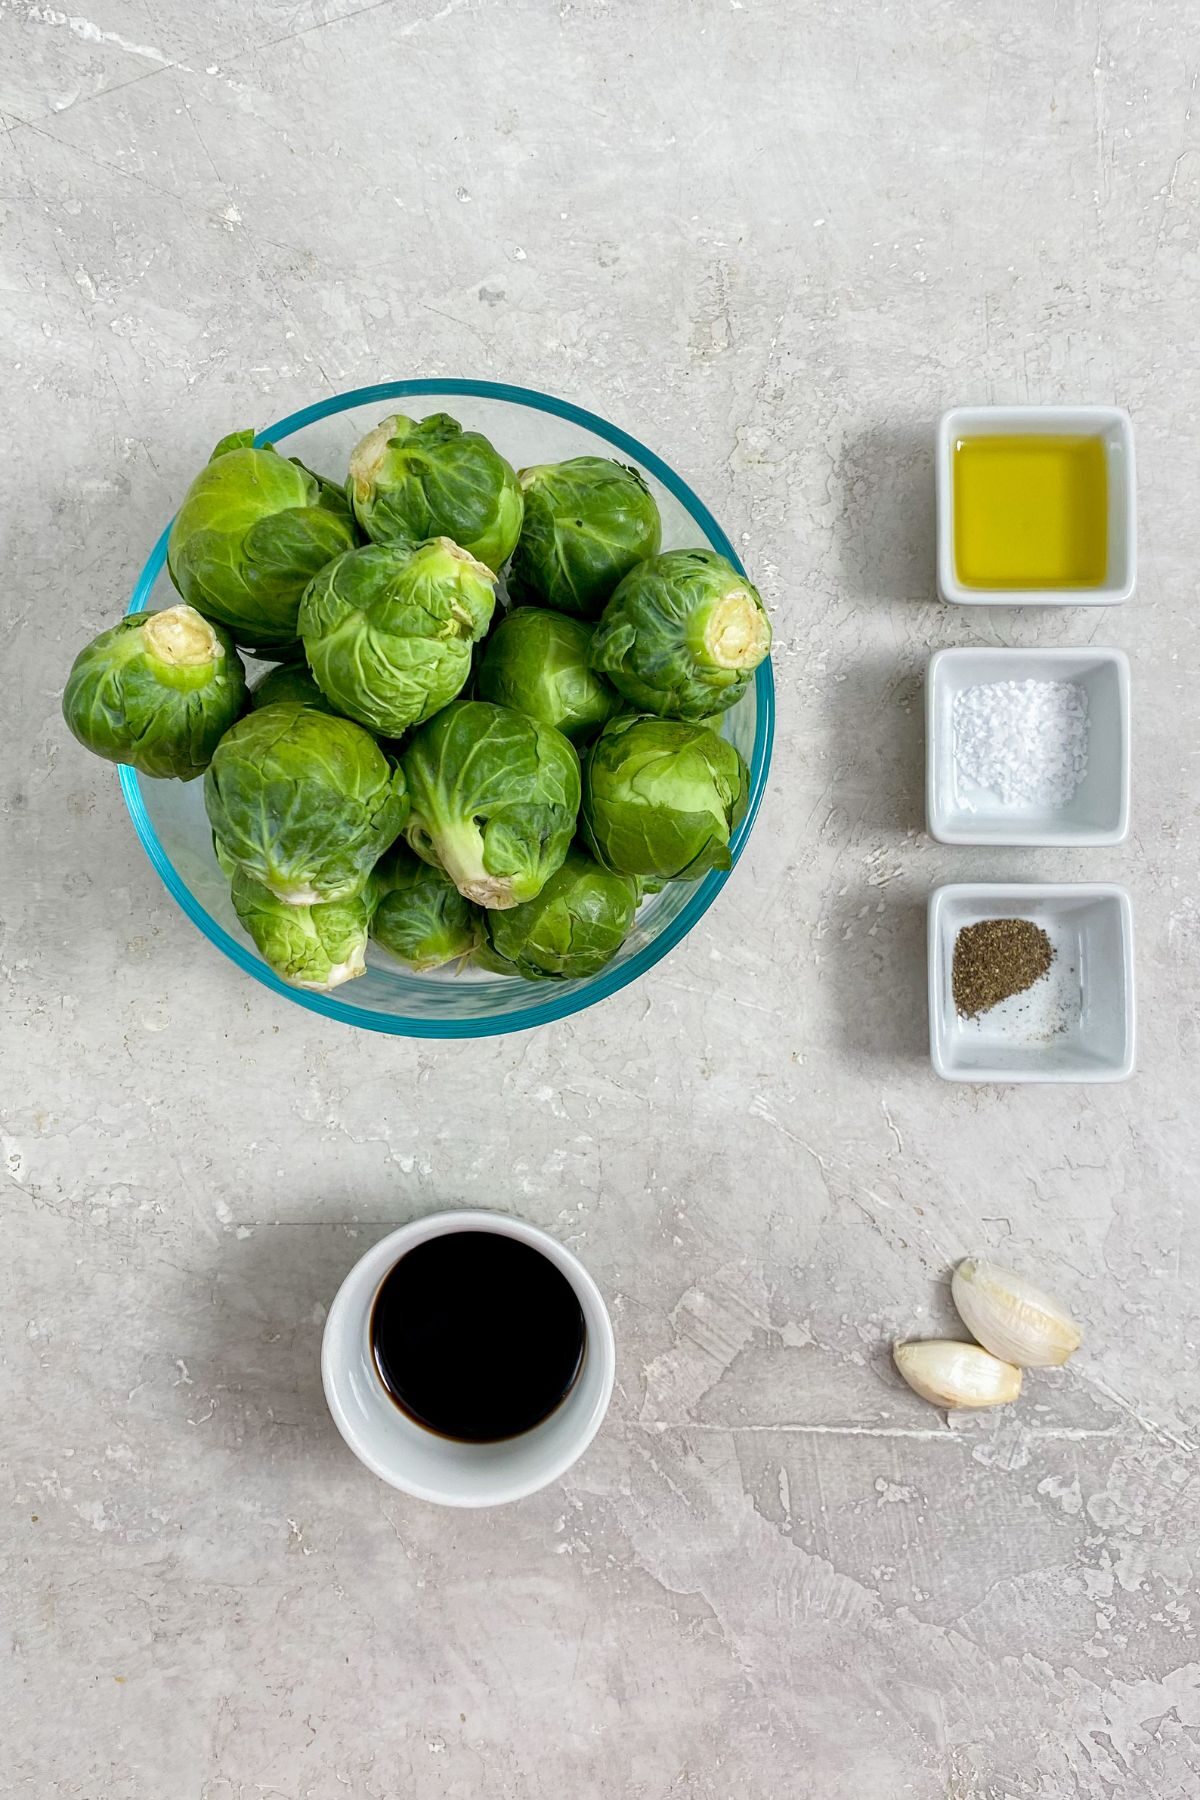 Ingredients for air fryer brussel sprouts